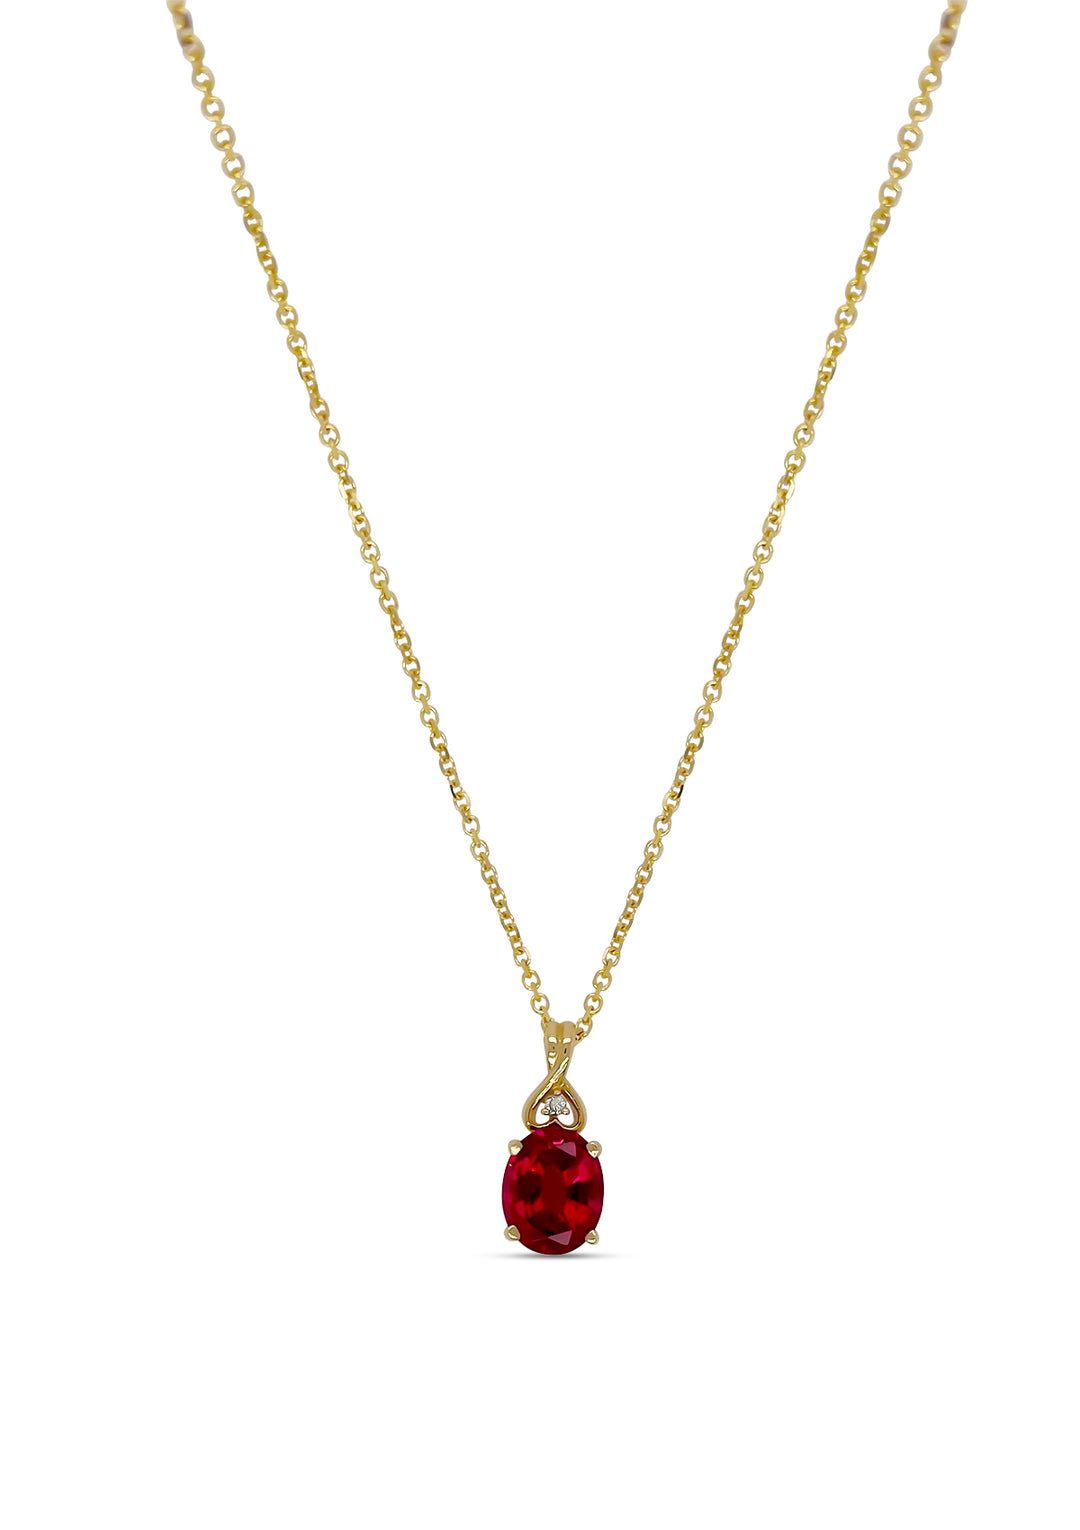 14K Yellow Gold 3.75 Carat Lab Grown Ruby And Diamond Necklace